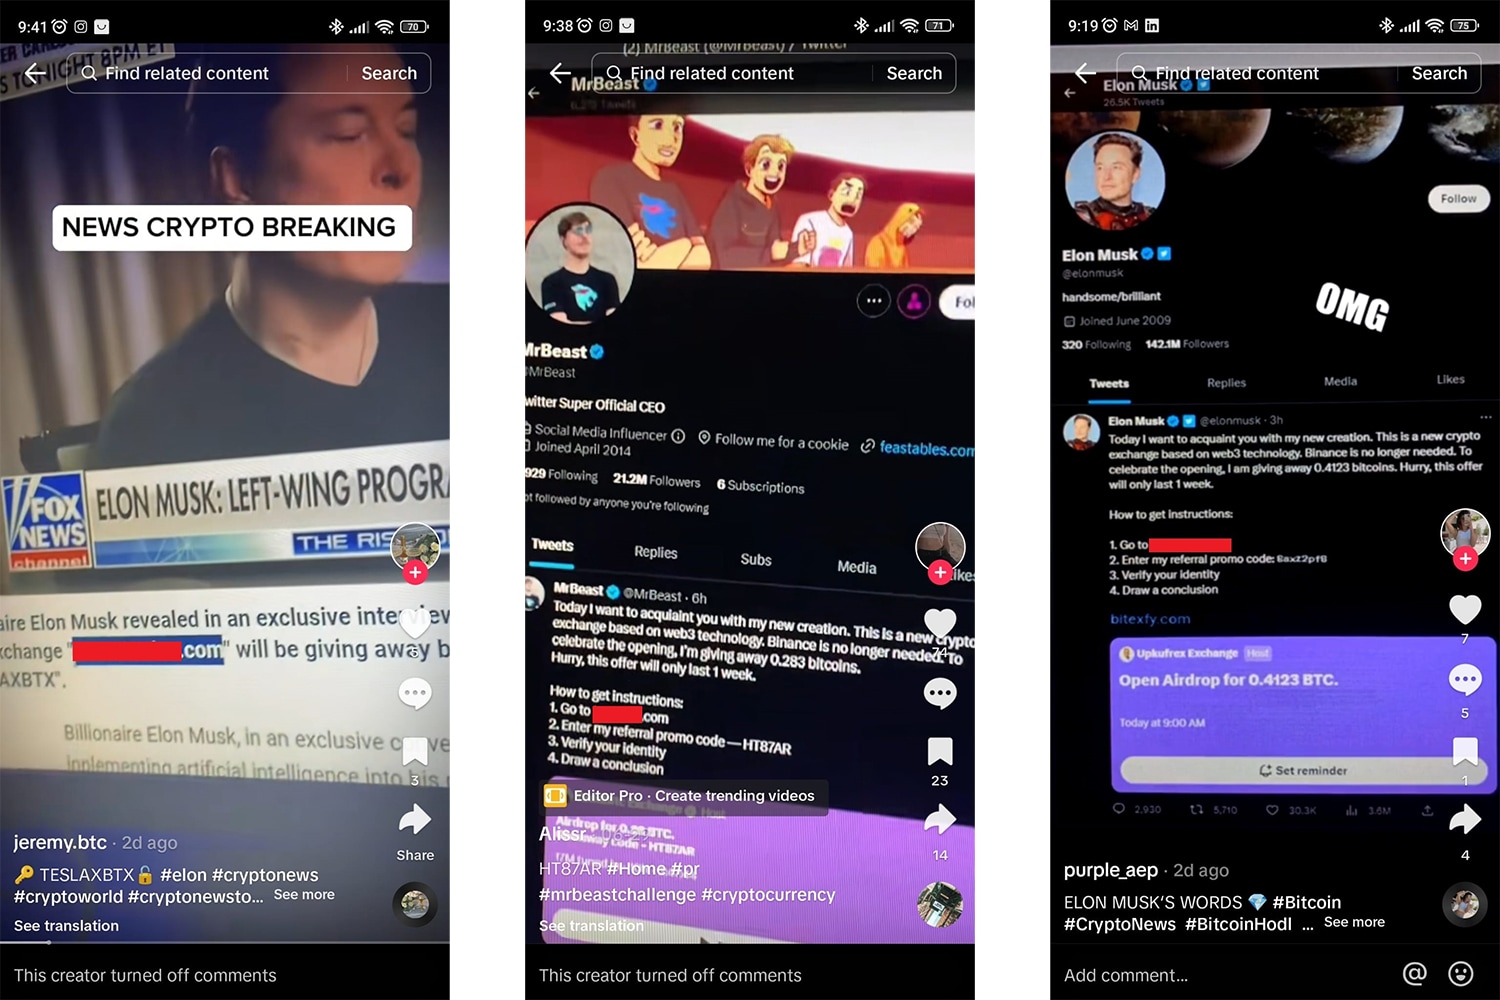 These examples show TikTok scams involving the image and likeness of celebrities.